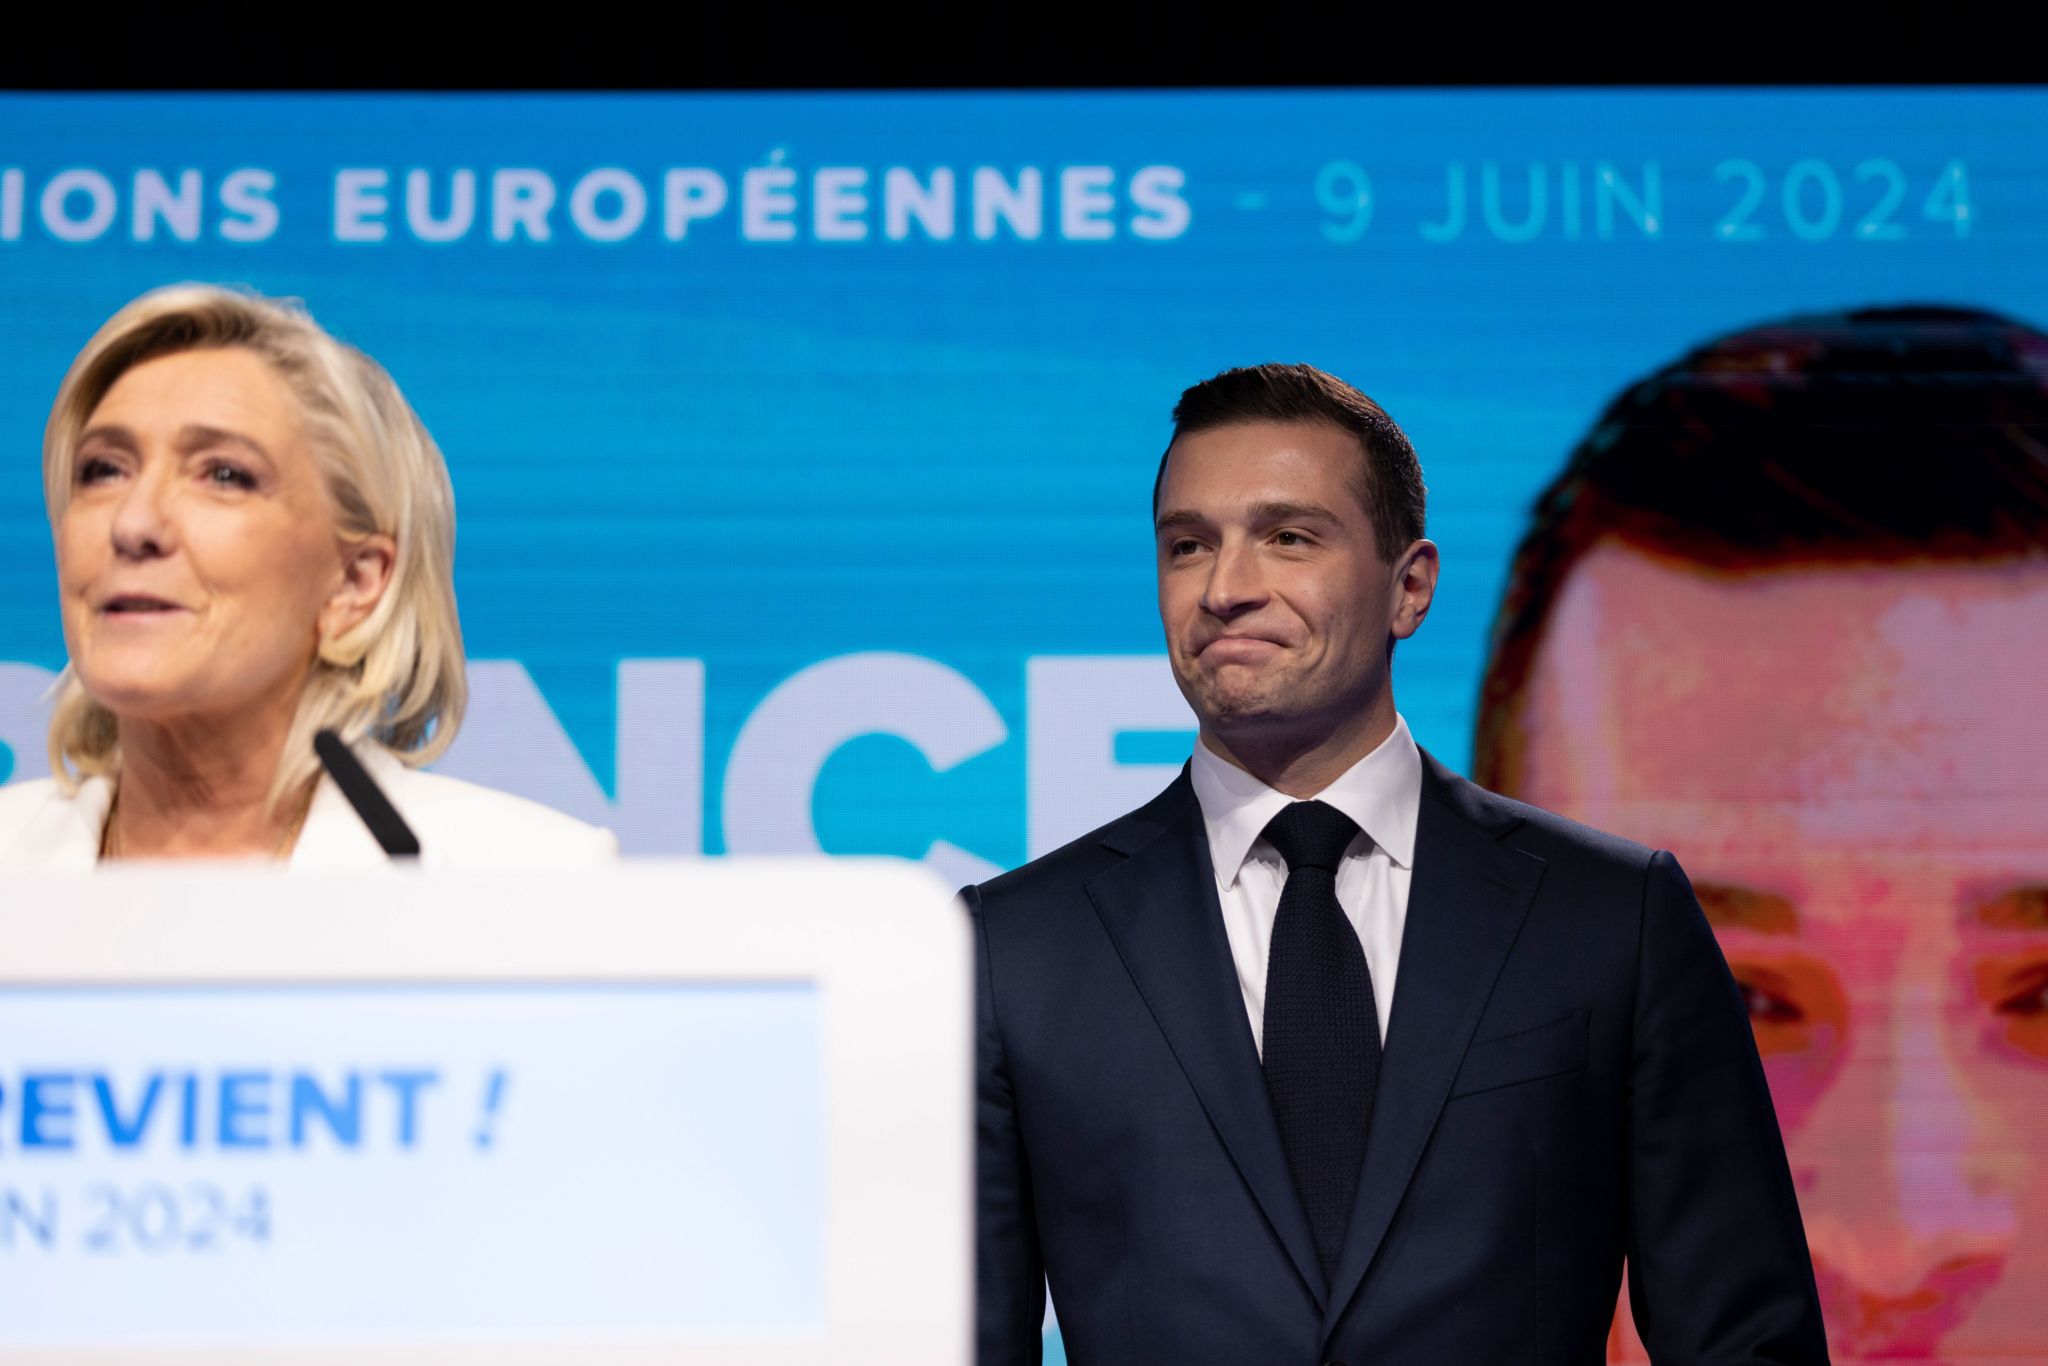 ational Rally leader Jordan Bardella (R) reacts as parliamentary party leader Marine Le Pen (L) delivers a speech at the electoral party of the French right-wing party National Rally (Rassemblement National or RN) in Paris